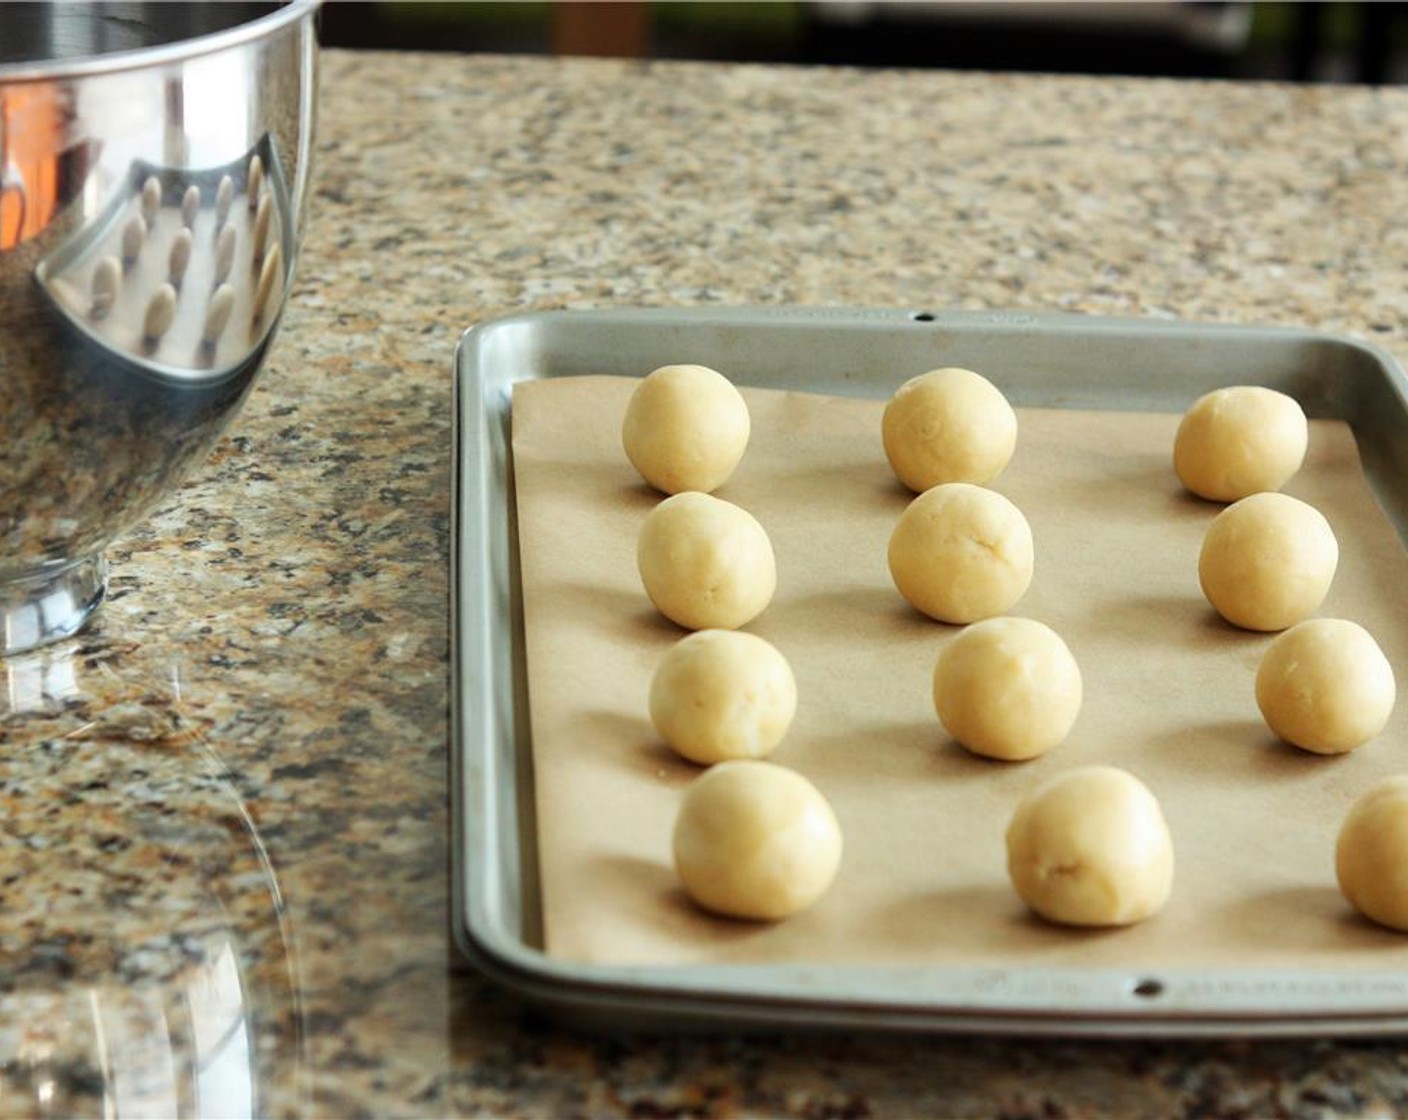 step 6 Remove dough from the refrigerator. Discard plastic wrap. Form 12 balls, each about 1 1/2″ inches in diameter. Use the palms of your hands to form them into balls. Space evenly on the baking sheet, leaving about two inches between them.